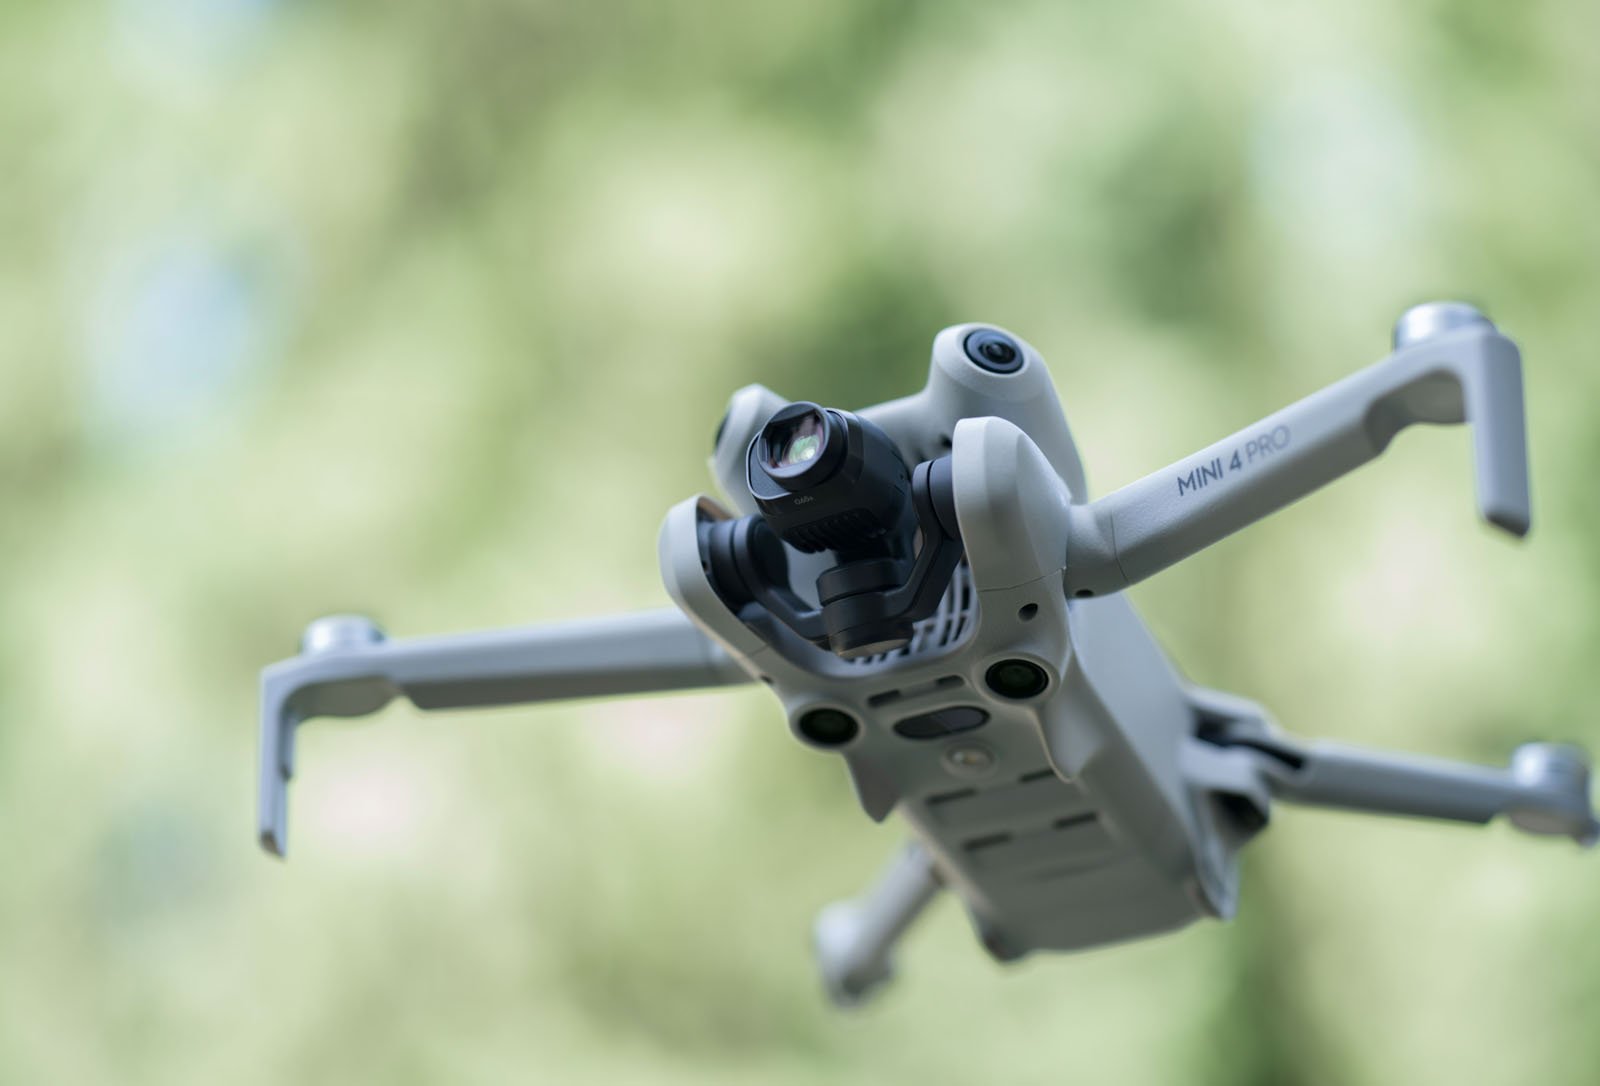 DJI Mini 4 Pro is a Sub-249g 48MP 4K Camera Drone that is Easier